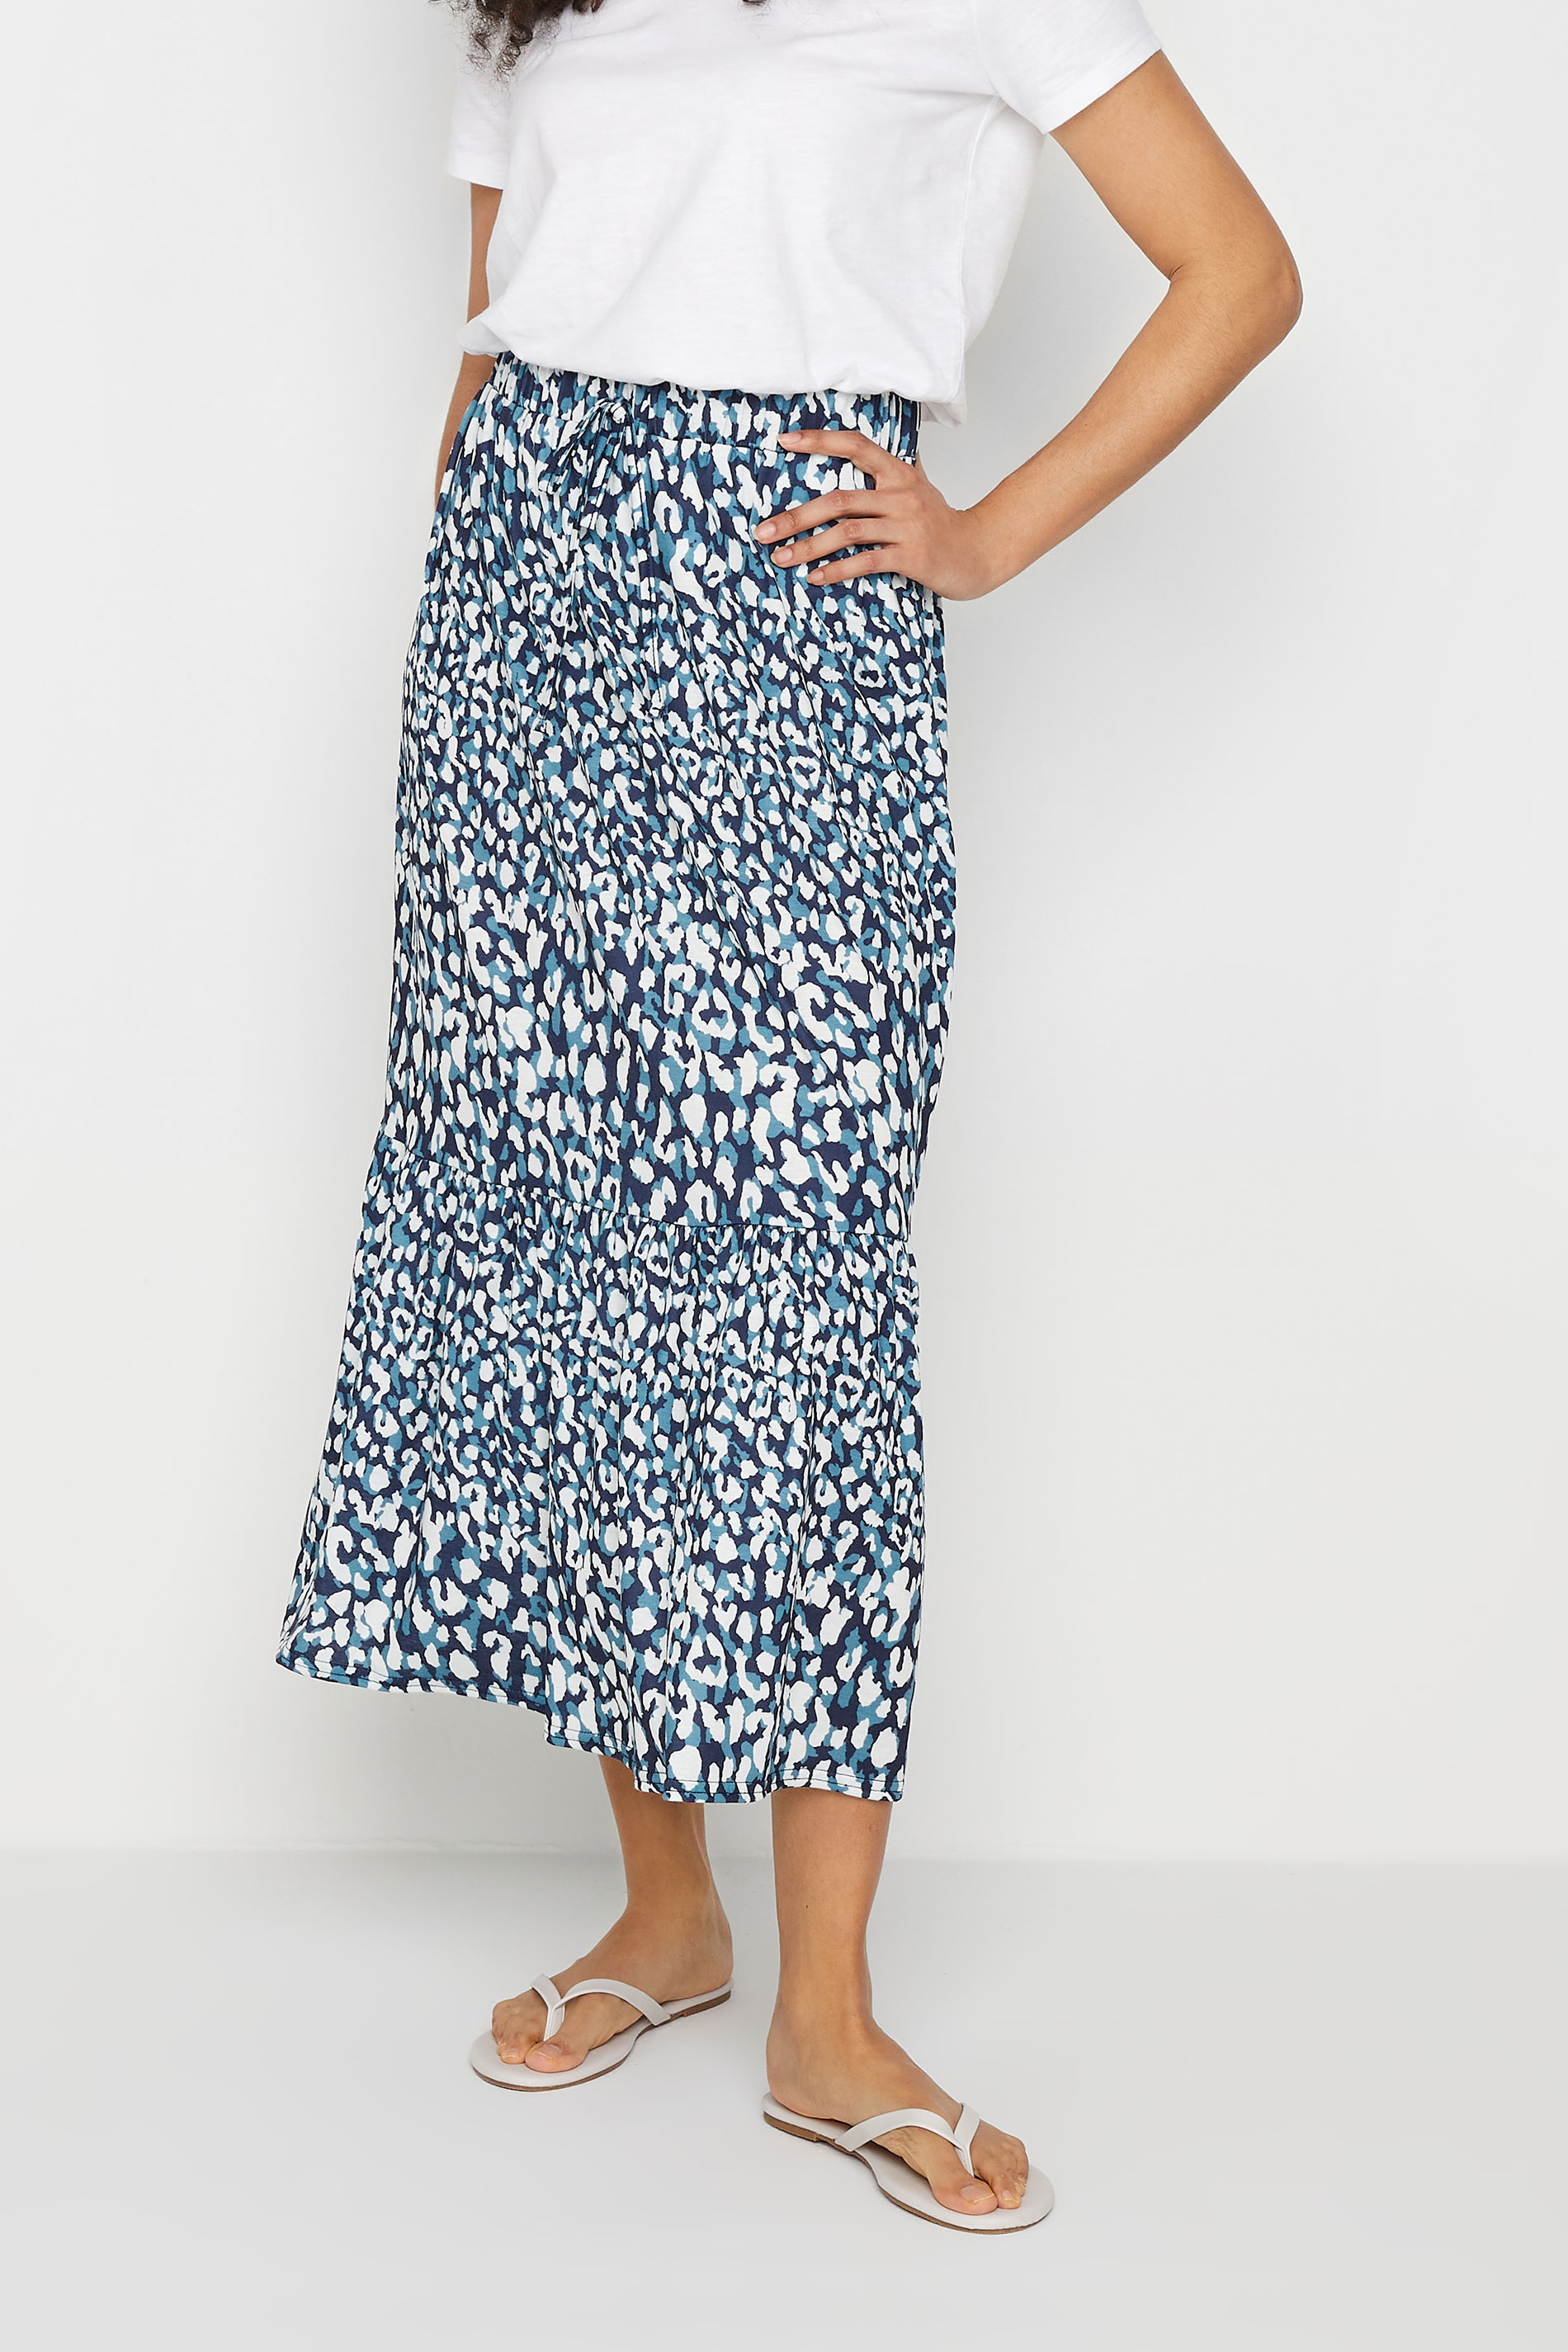 M&Co Blue Leopard Print Tiered Skirt | M&Co 1